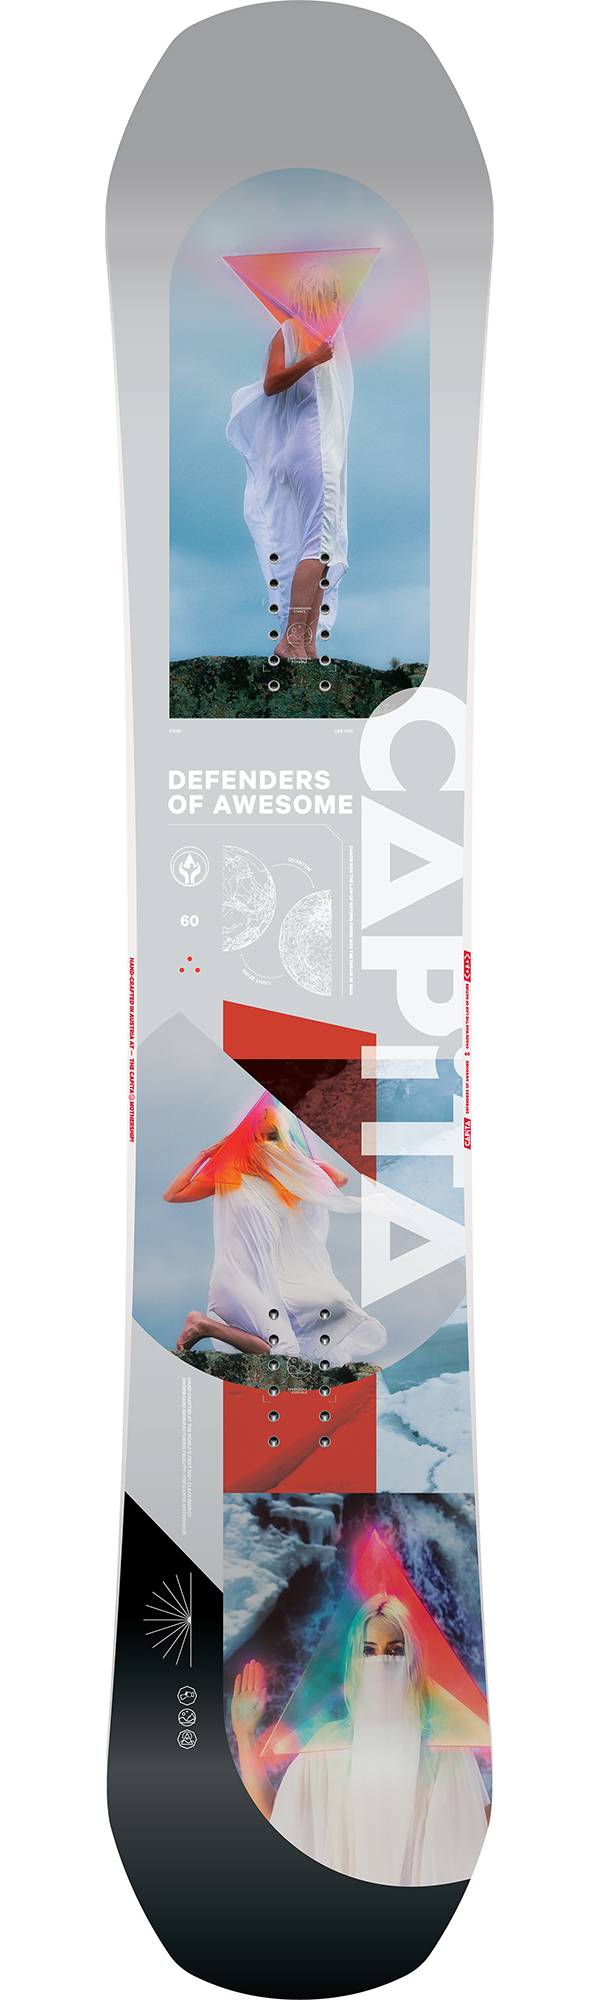 CAPiTA Defenders of Awesome Snowboard product image